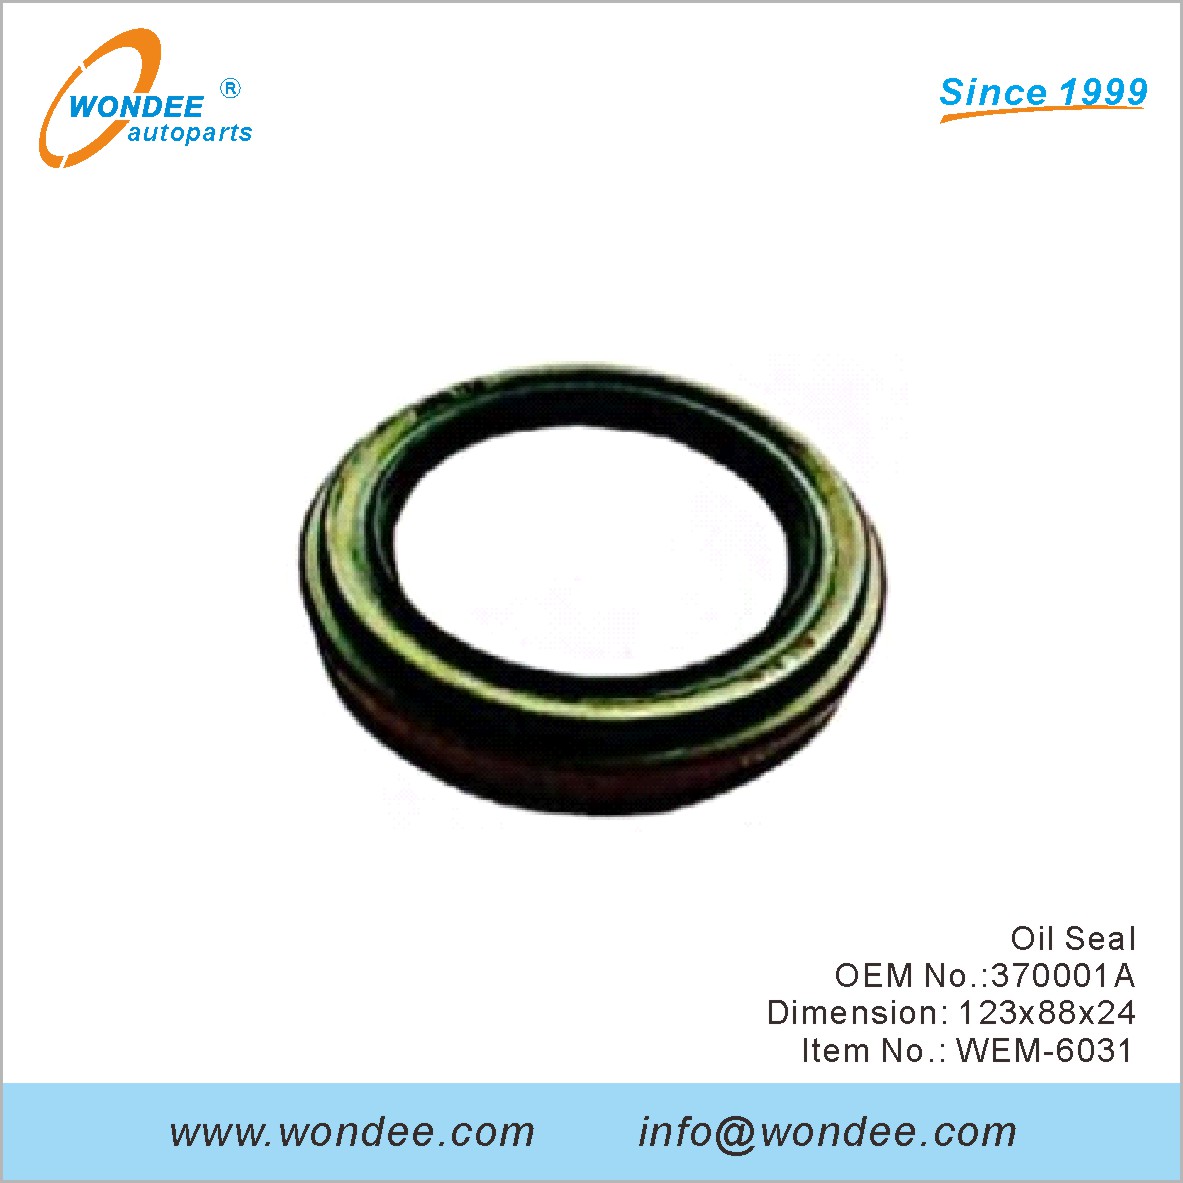 Oil Seal OEM 370001A for engine mouting from WONDEE